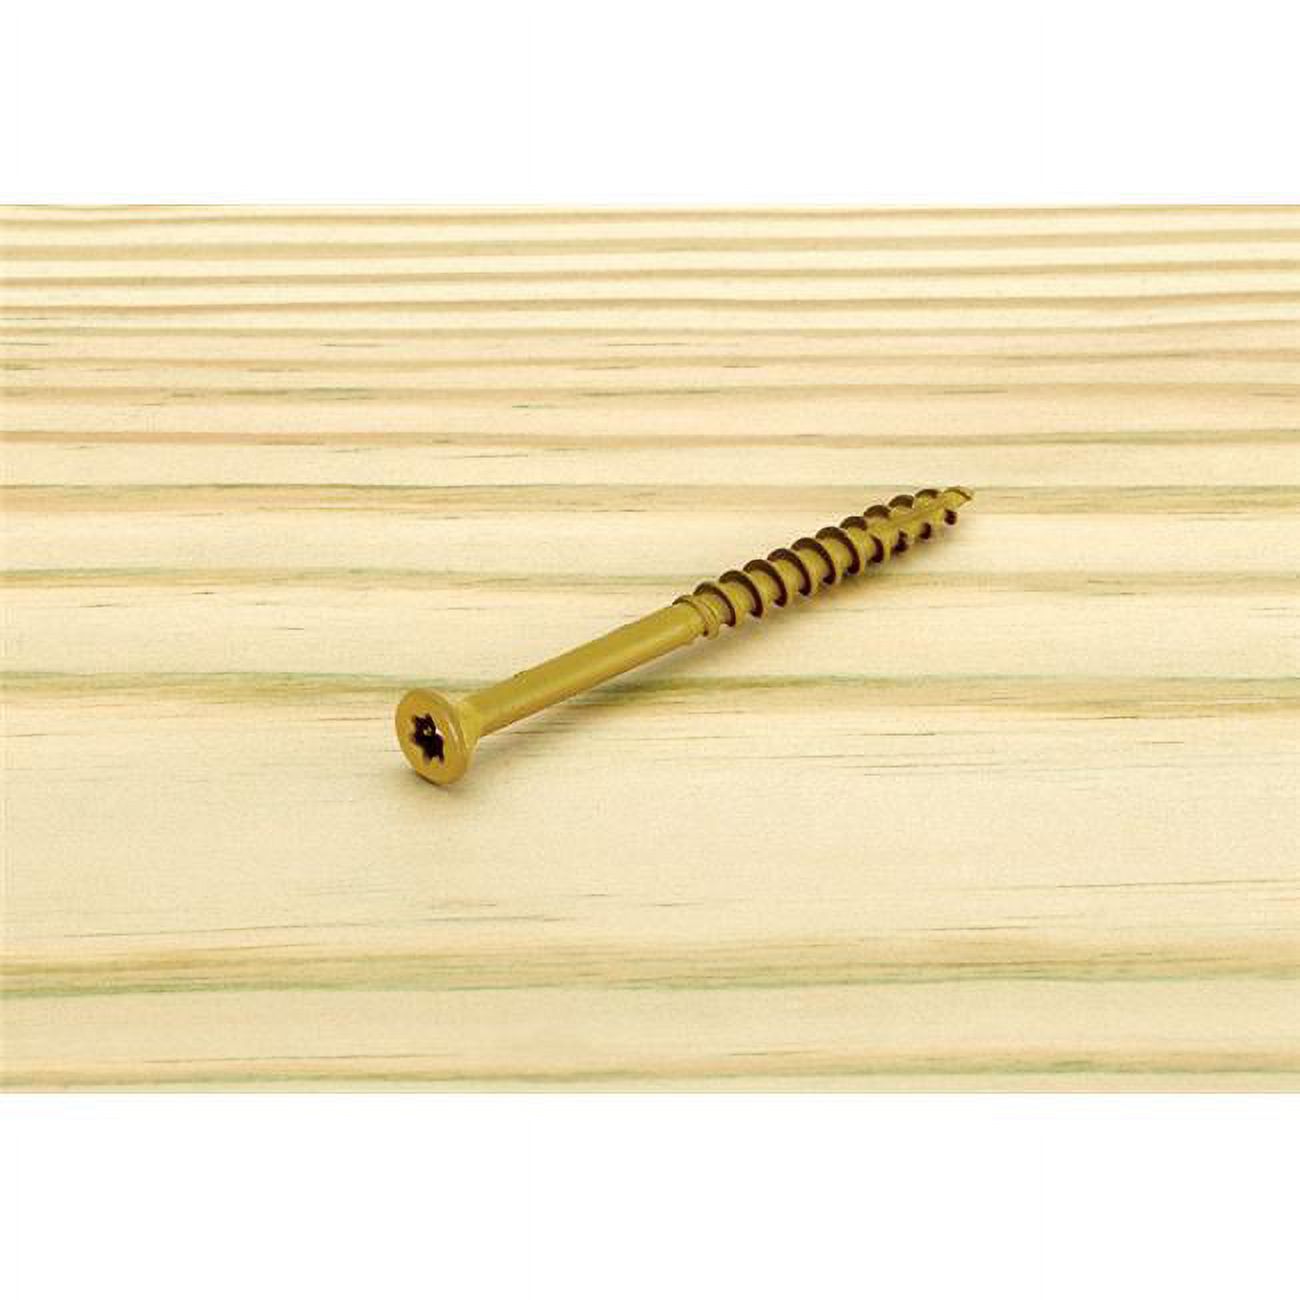 No.9 x 2.5 in. Star Flat Head Epoxy Coated Carbon Steel Deck Screws, Pack of 250 - image 1 of 1